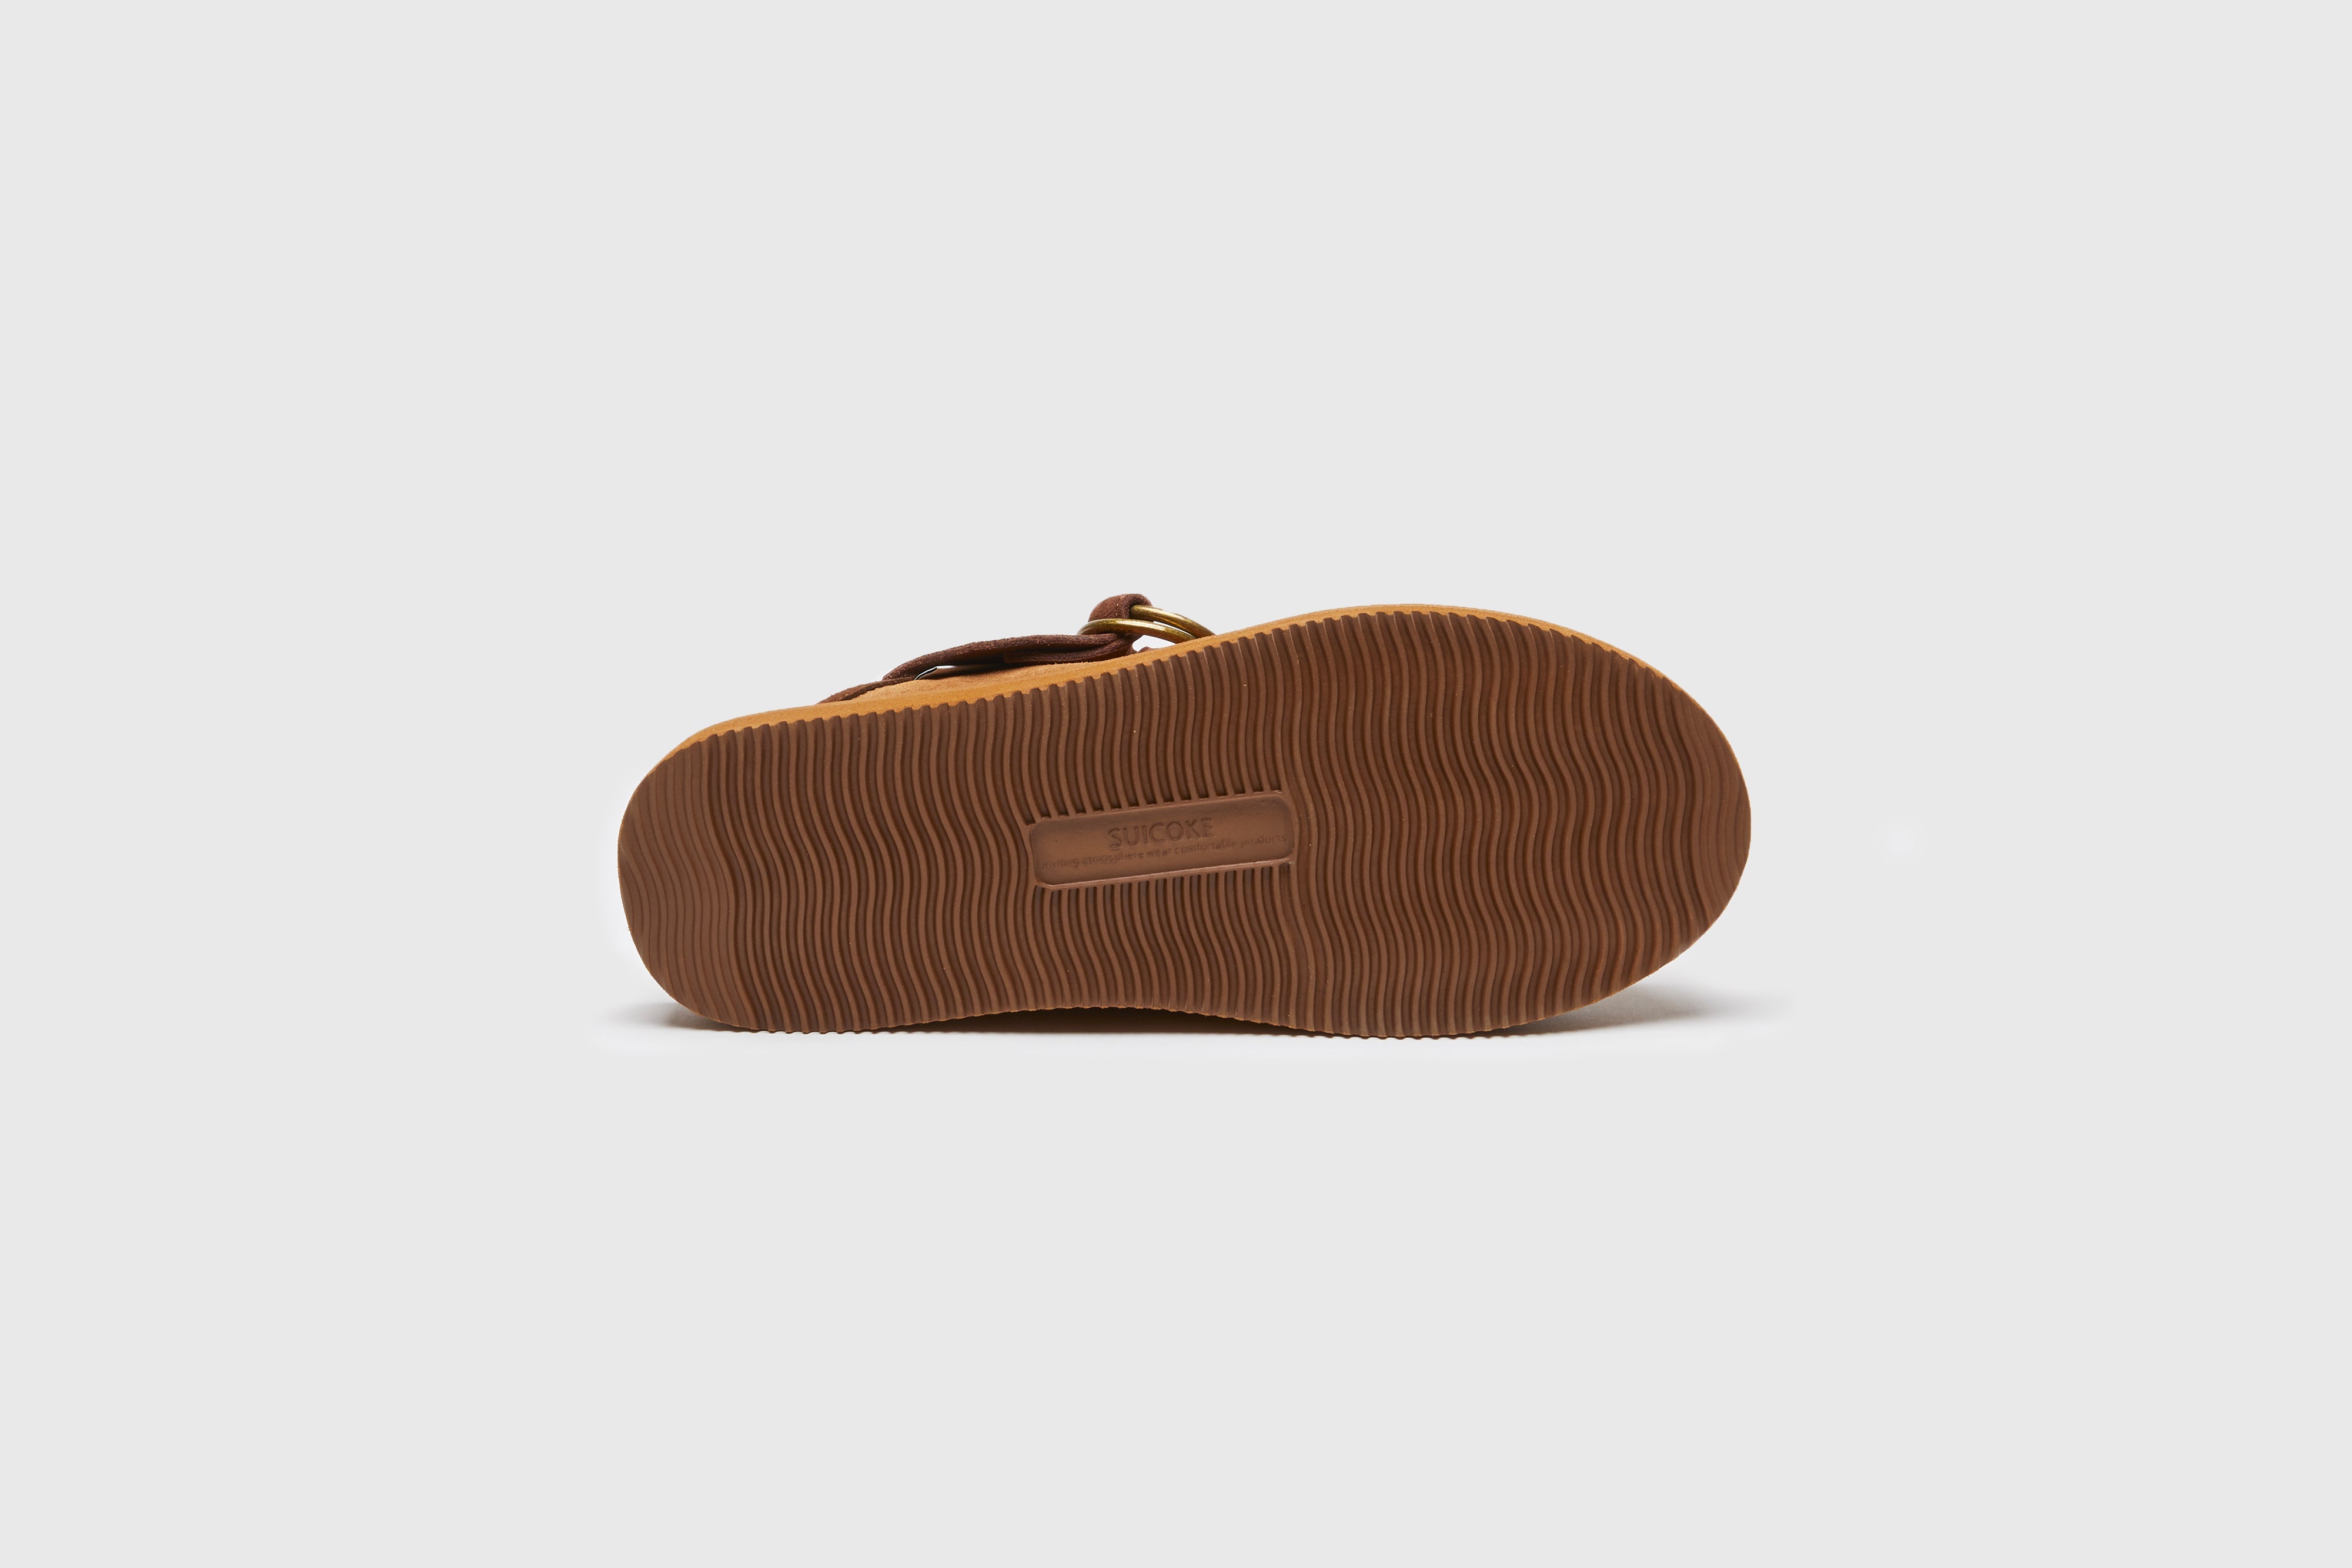 SUICOKE AKK-ab sneakers with brown nylon upper, brown midsole and sole, strap and logo patch. From Spring/Summer 2023 collection on eightywingold Web Store, an official partner of SUICOKE. OG-324SAB BROWN